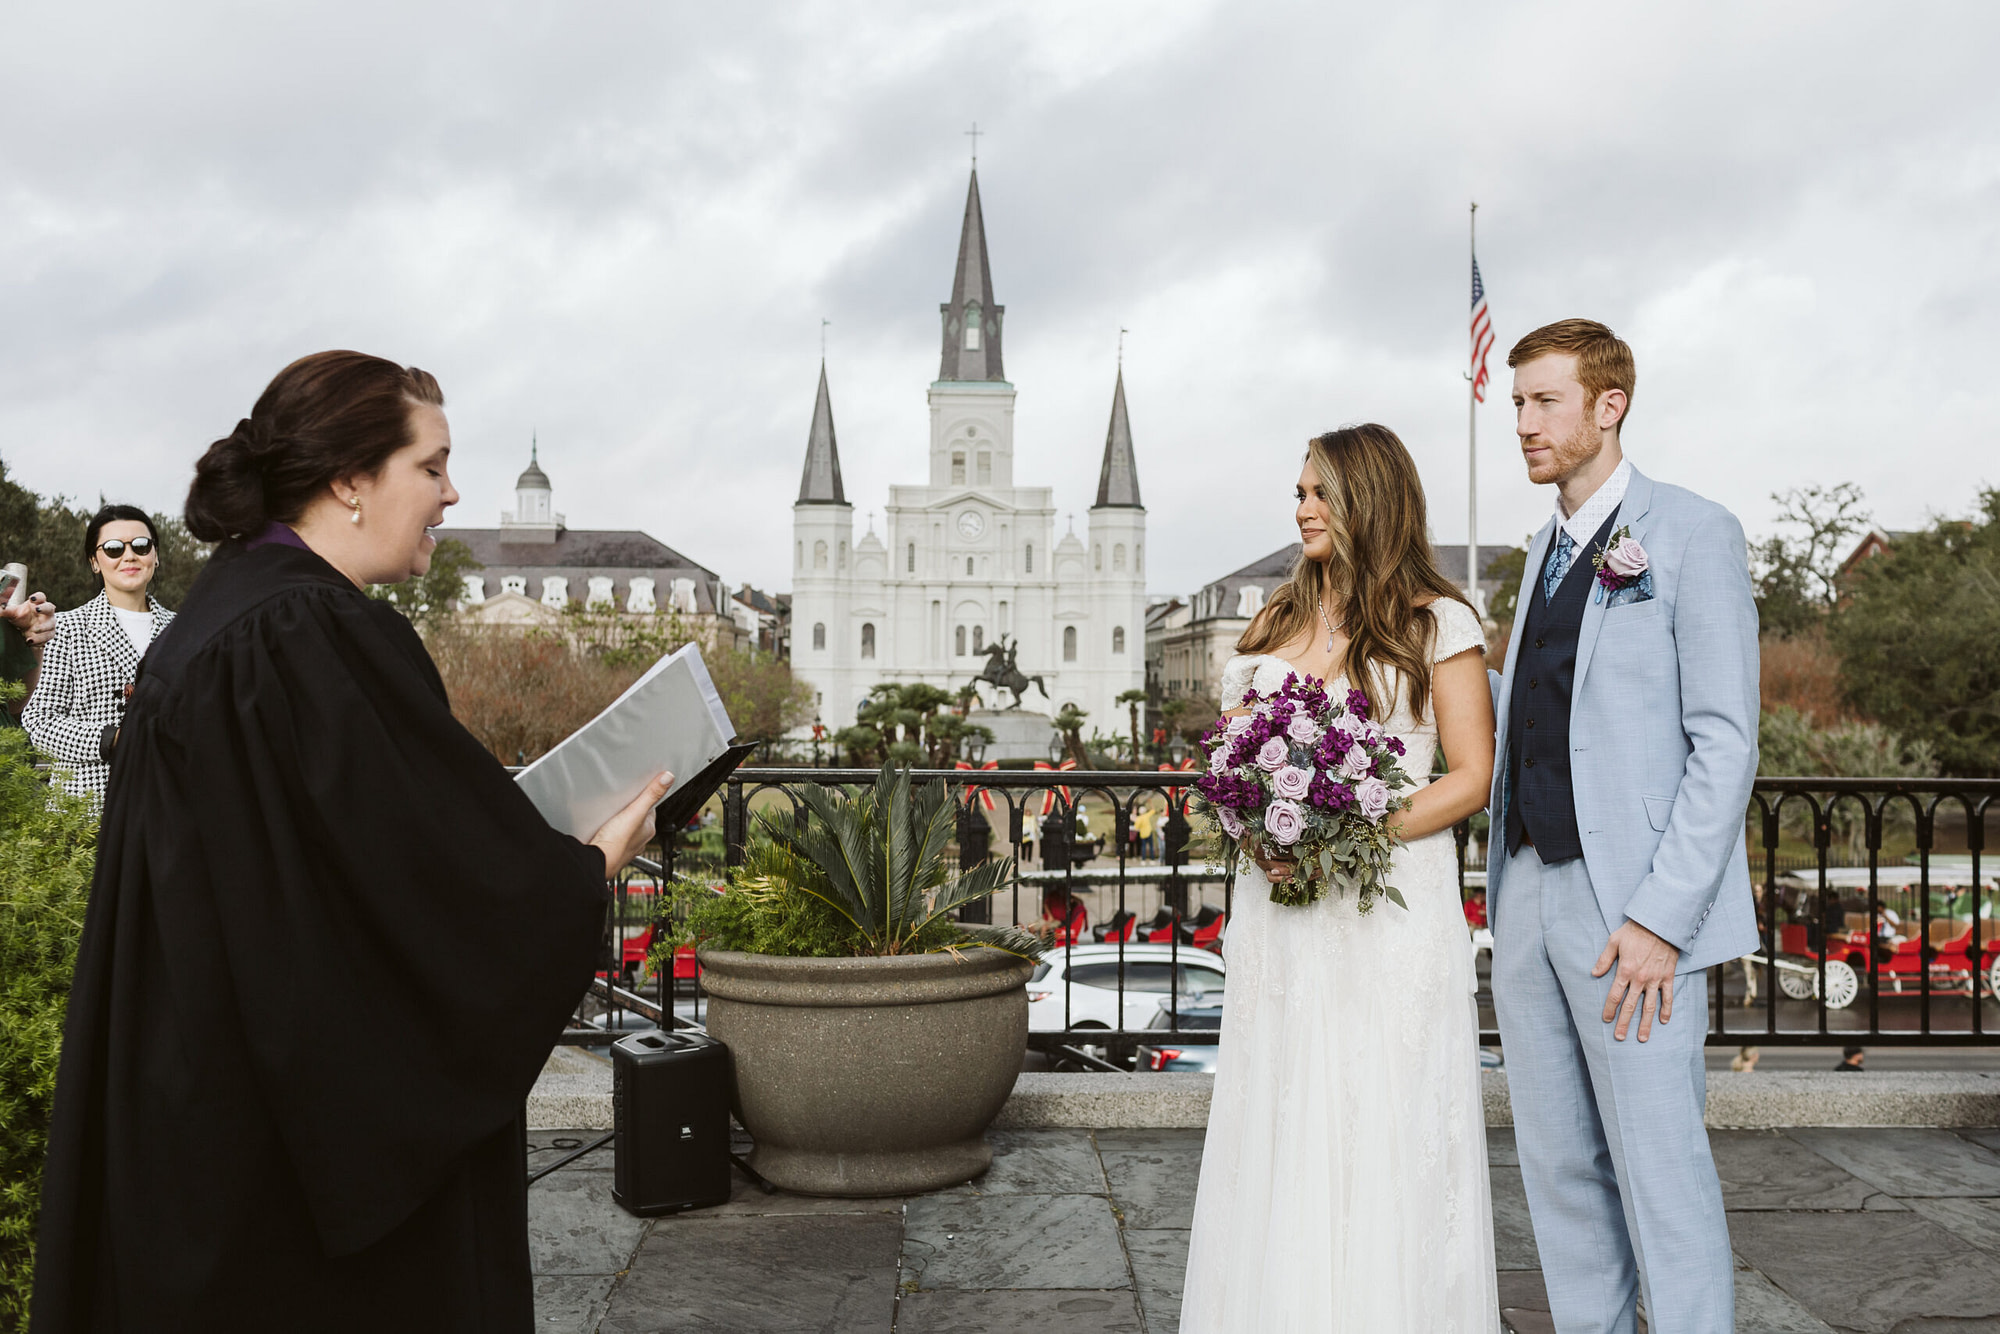 Marry at Jackson Square